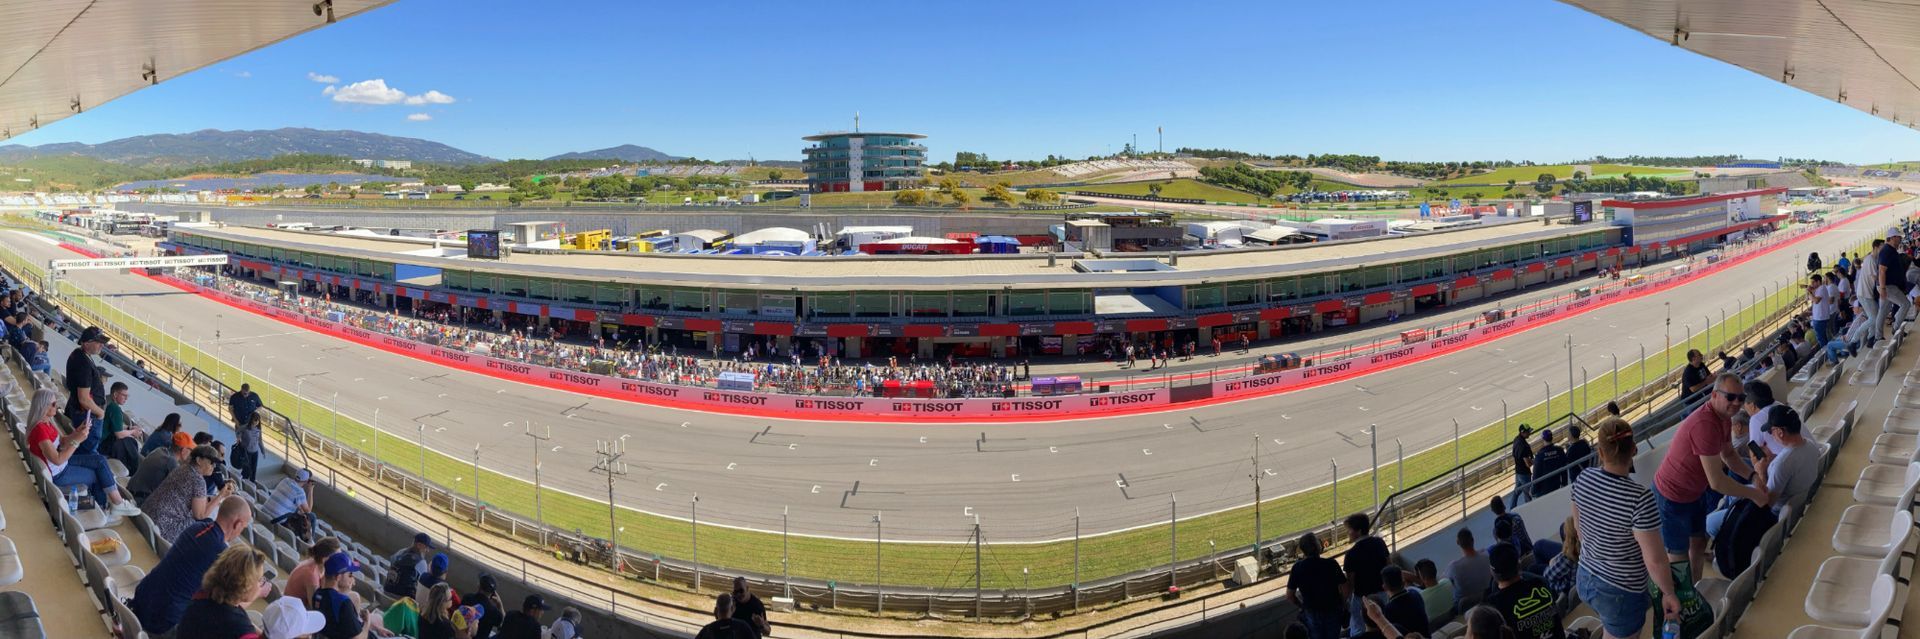 Photographing the Portuguese MotoGP round at Portimão